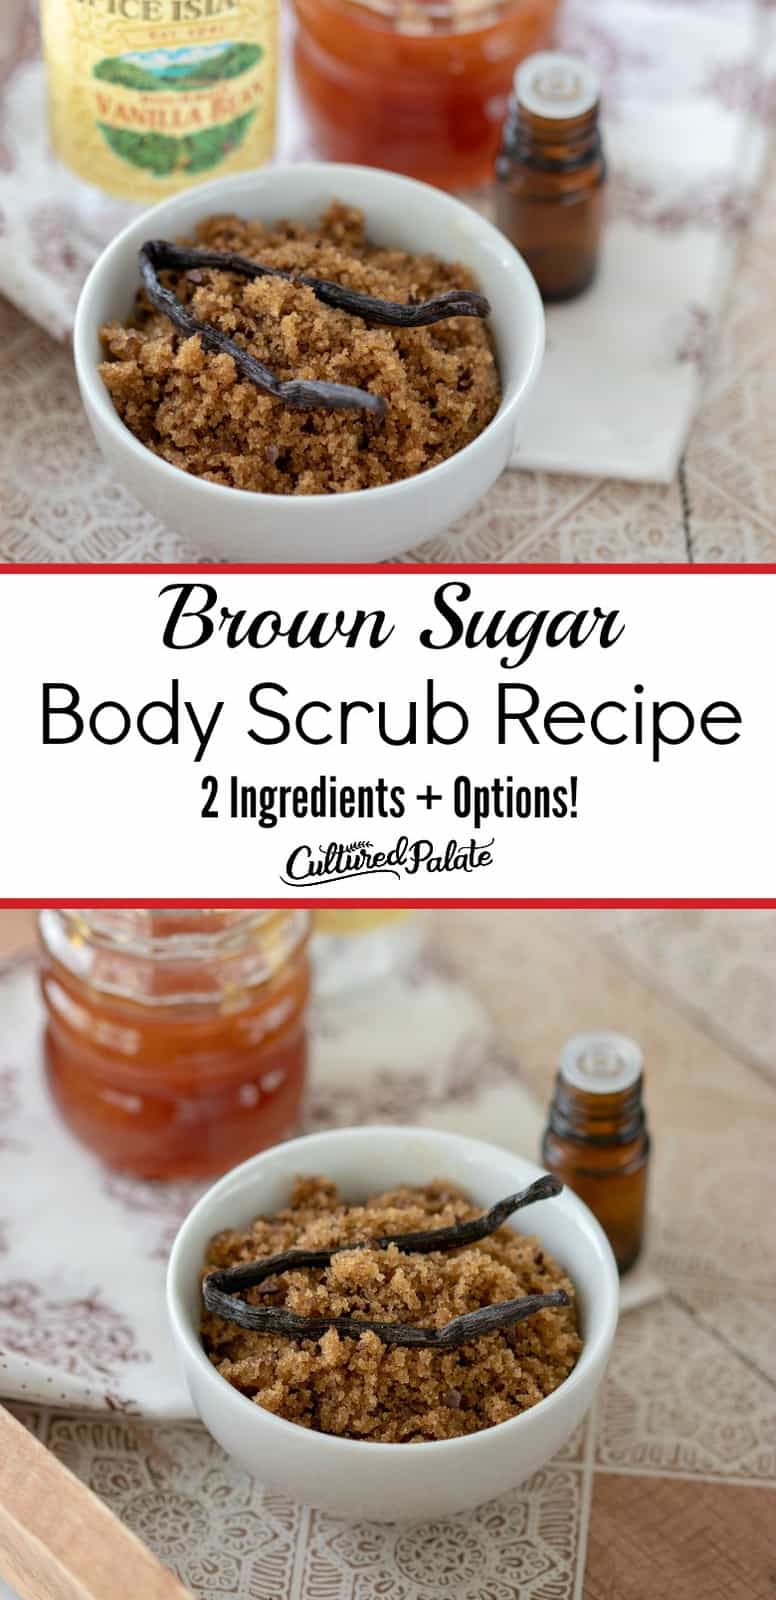 Brown Sugar Body Scrub shown in two images with text overlay and honey with essential oils in background.